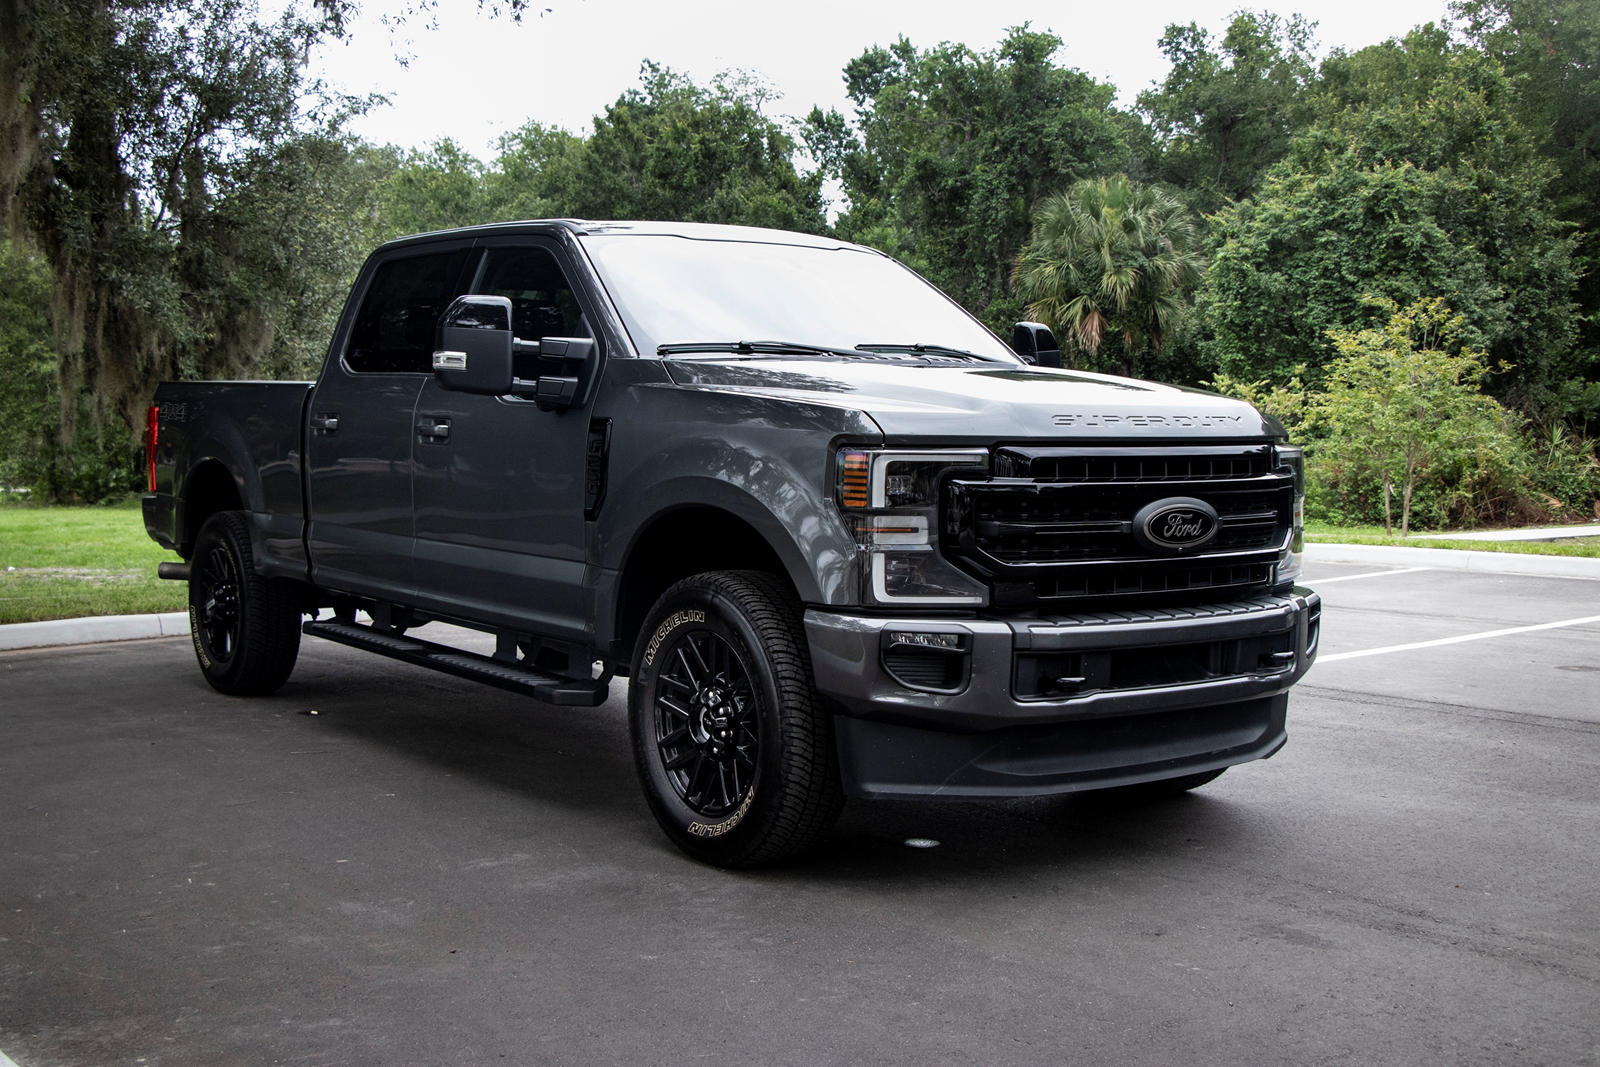 What We Love And Hate About The Ford F-250 Super Duty | CarBuzz